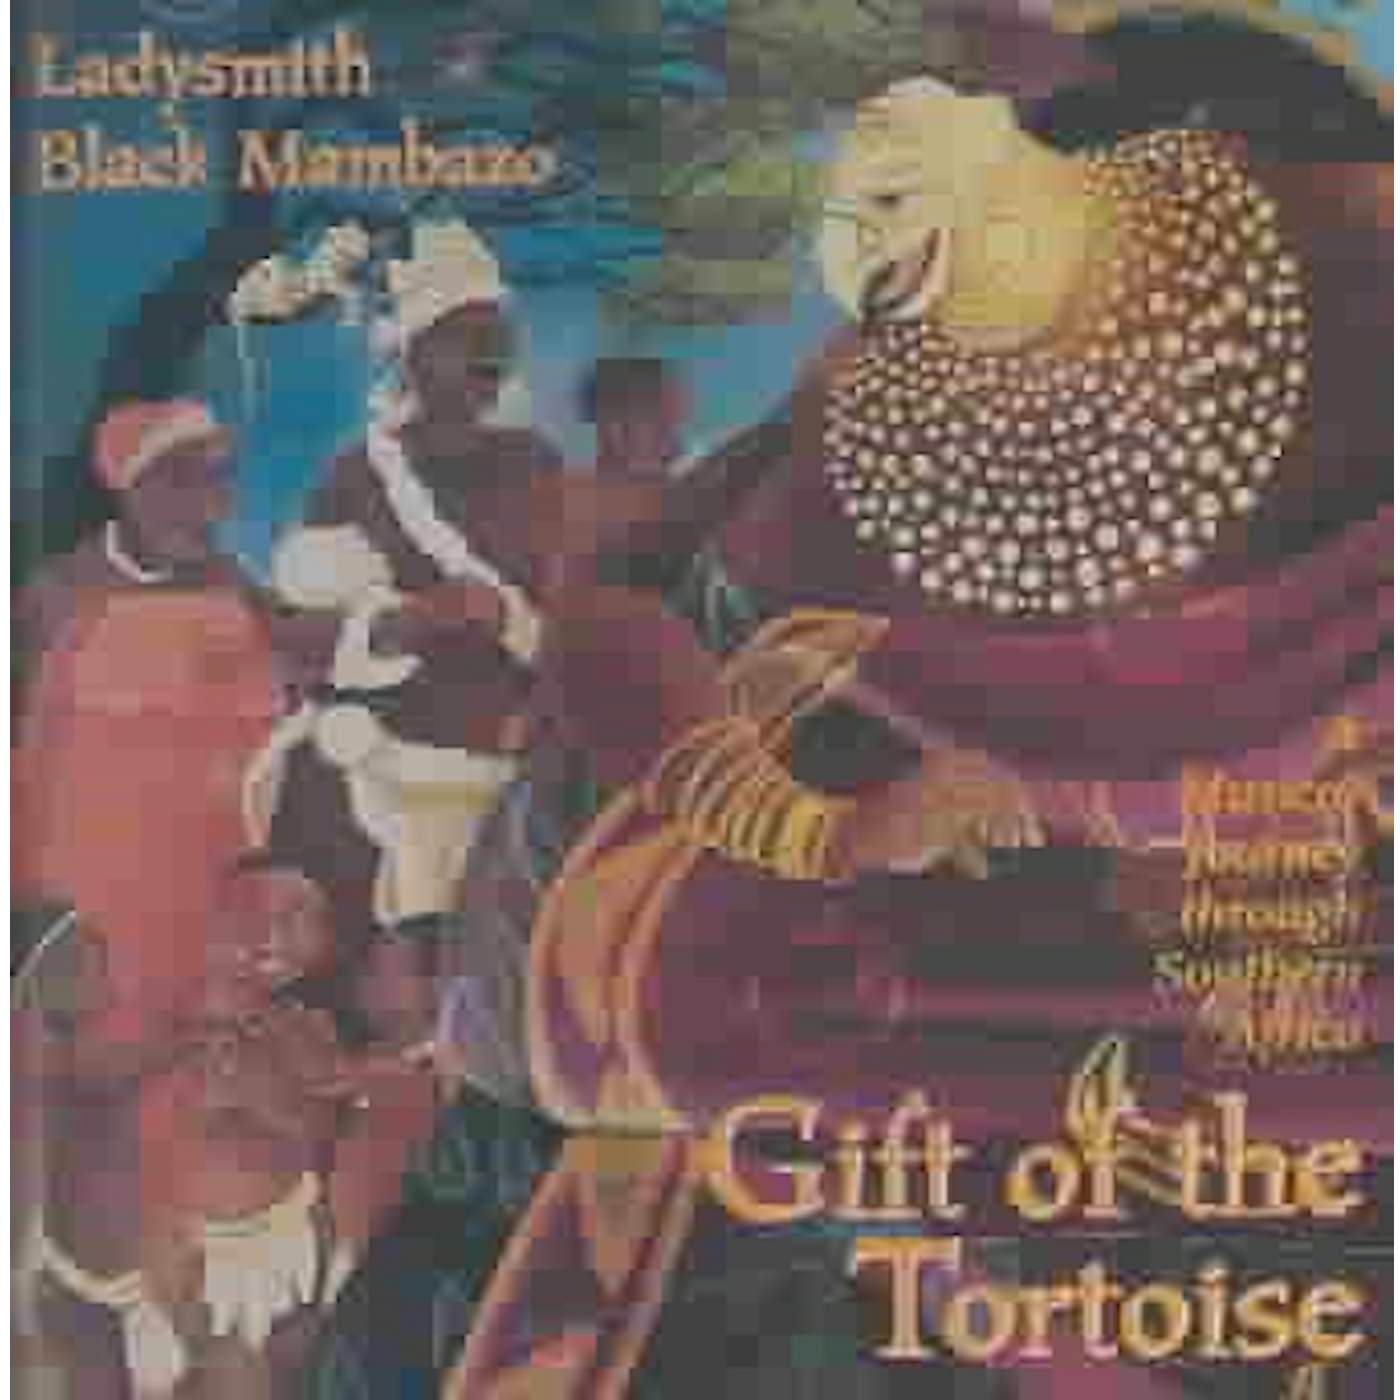 Ladysmith Black Mambazo Gift Of The Tortoise: A Musical Journey Through Southern Africa CD